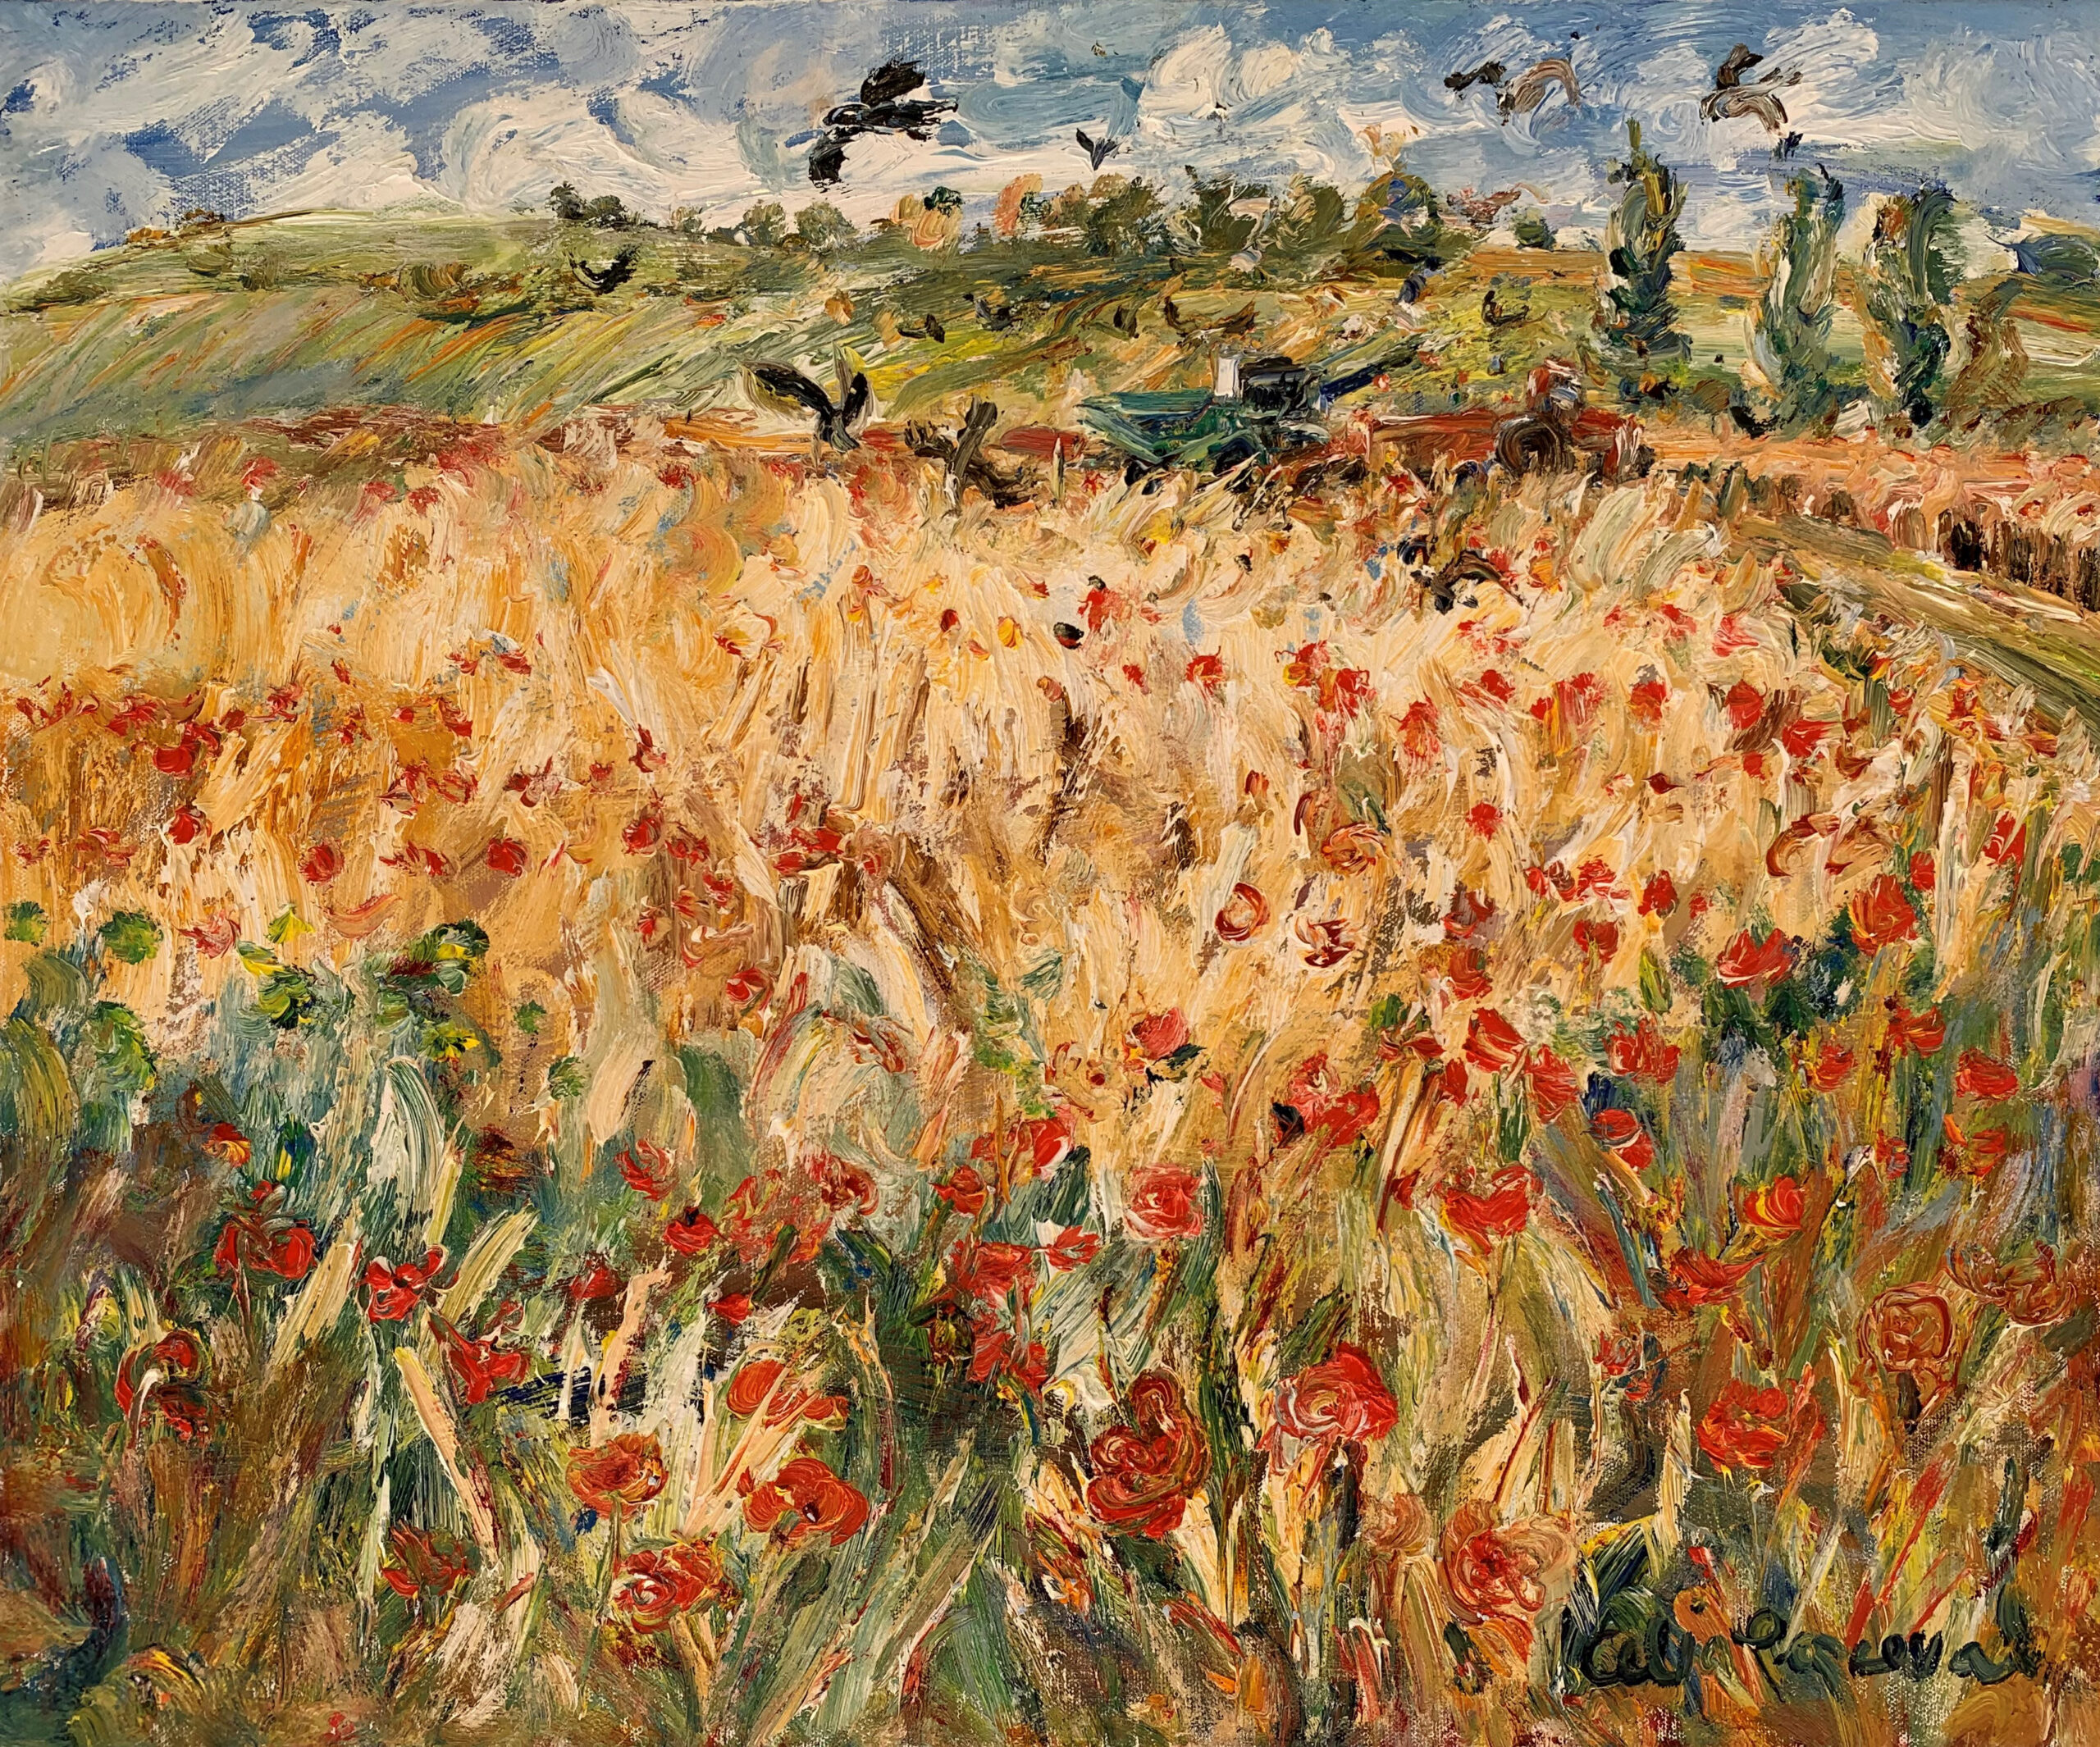 Perceval-Harvesting Oats with Kites in the Poppies, Charpent Region France - oil on canvas-51 x 61cm-master